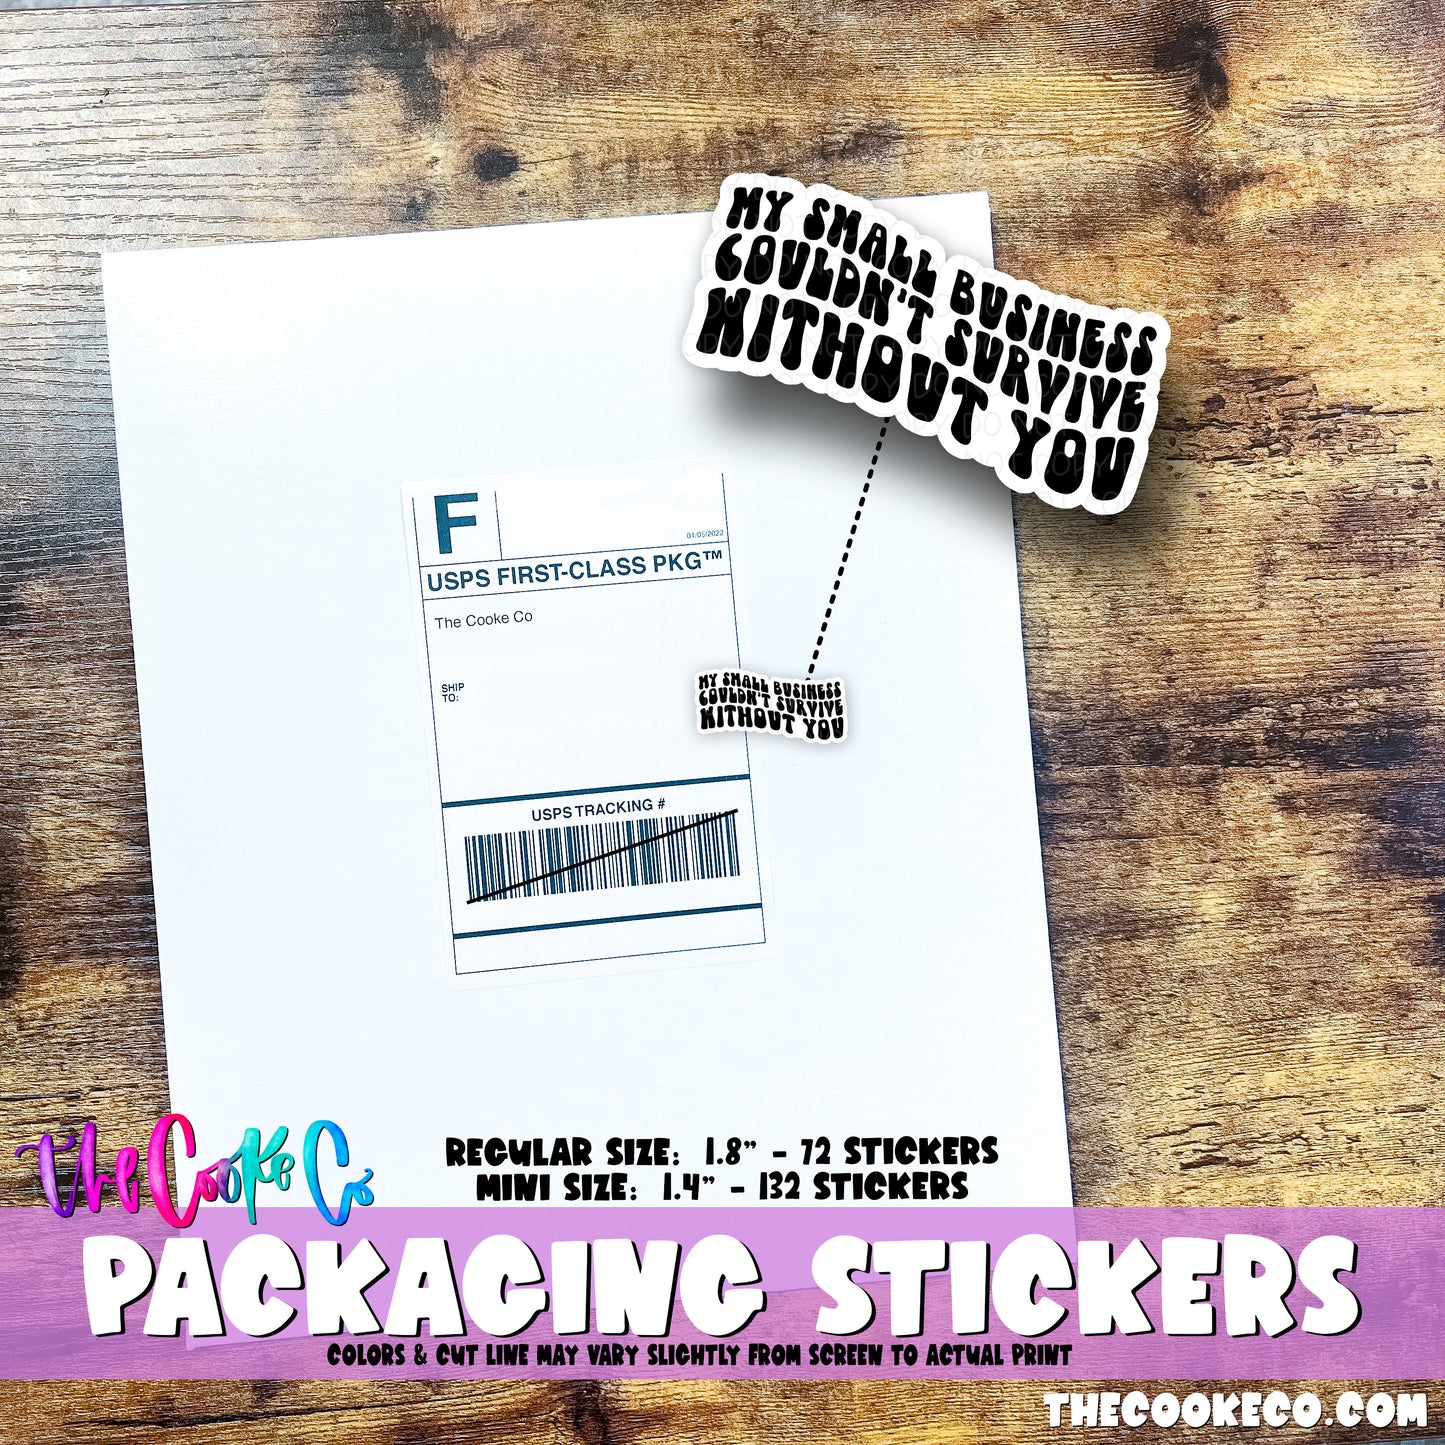 Packaging Stickers | #BW0209 - MY SMALL BUSINESS COULDN'T SURVIVE WITHOUT YOU